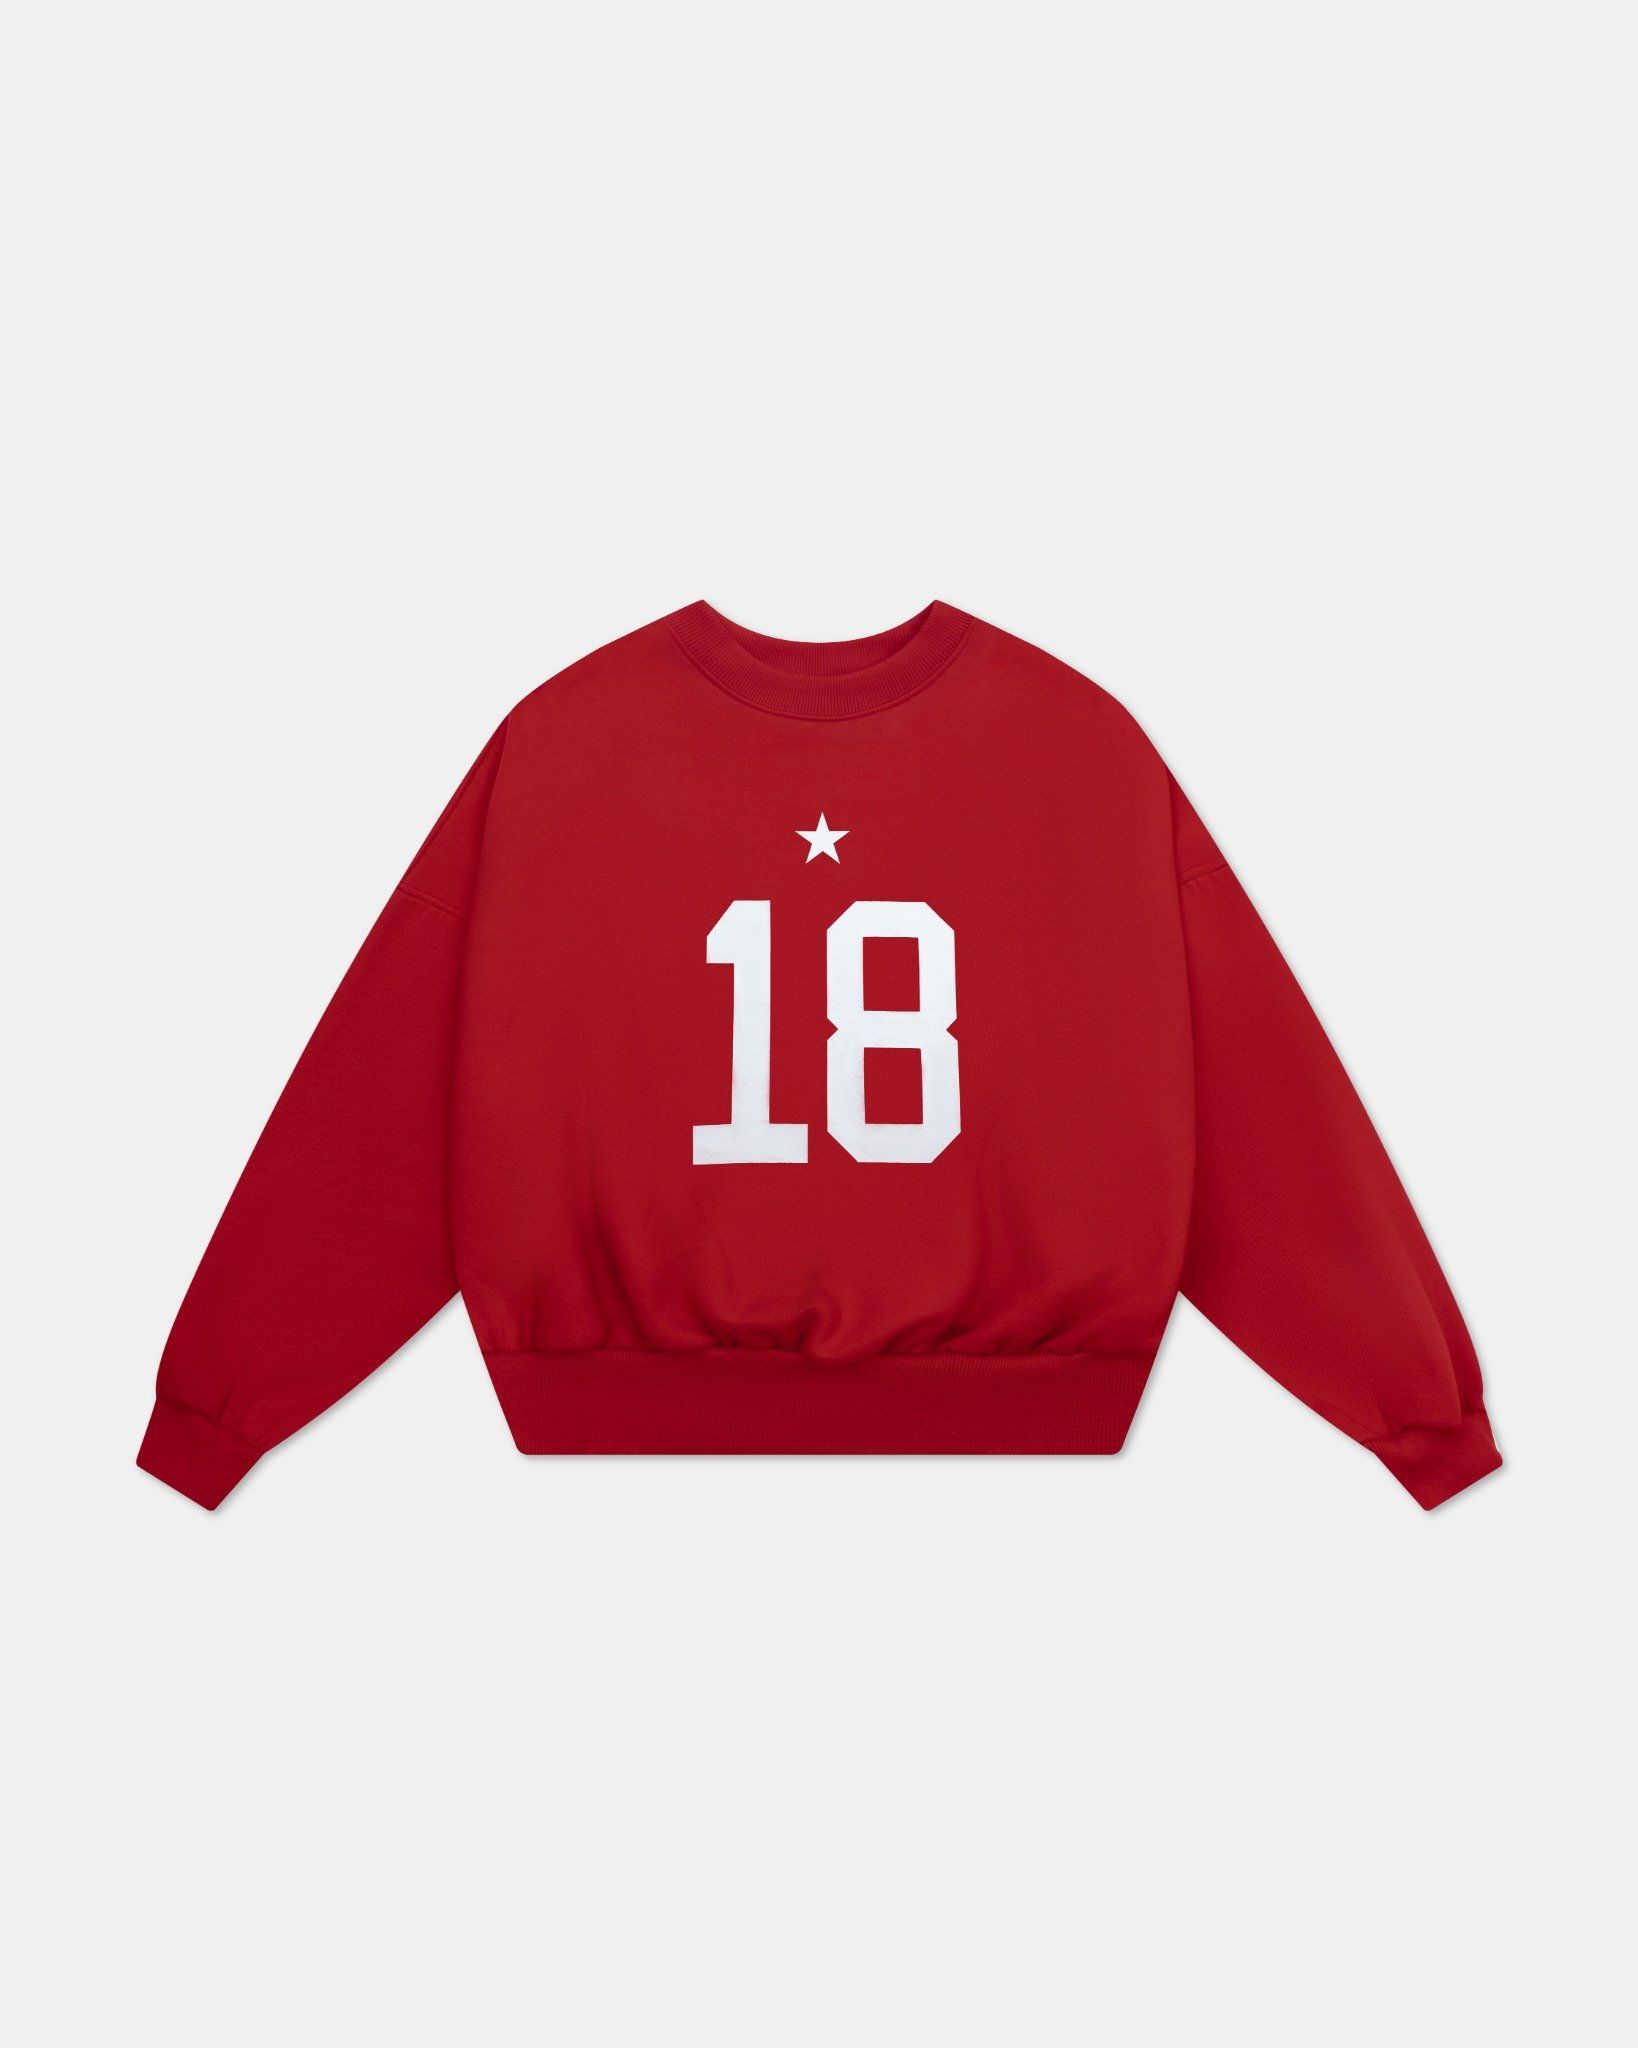  SW9 - BALANCE NUMBER SWEATER - FIRE RED 